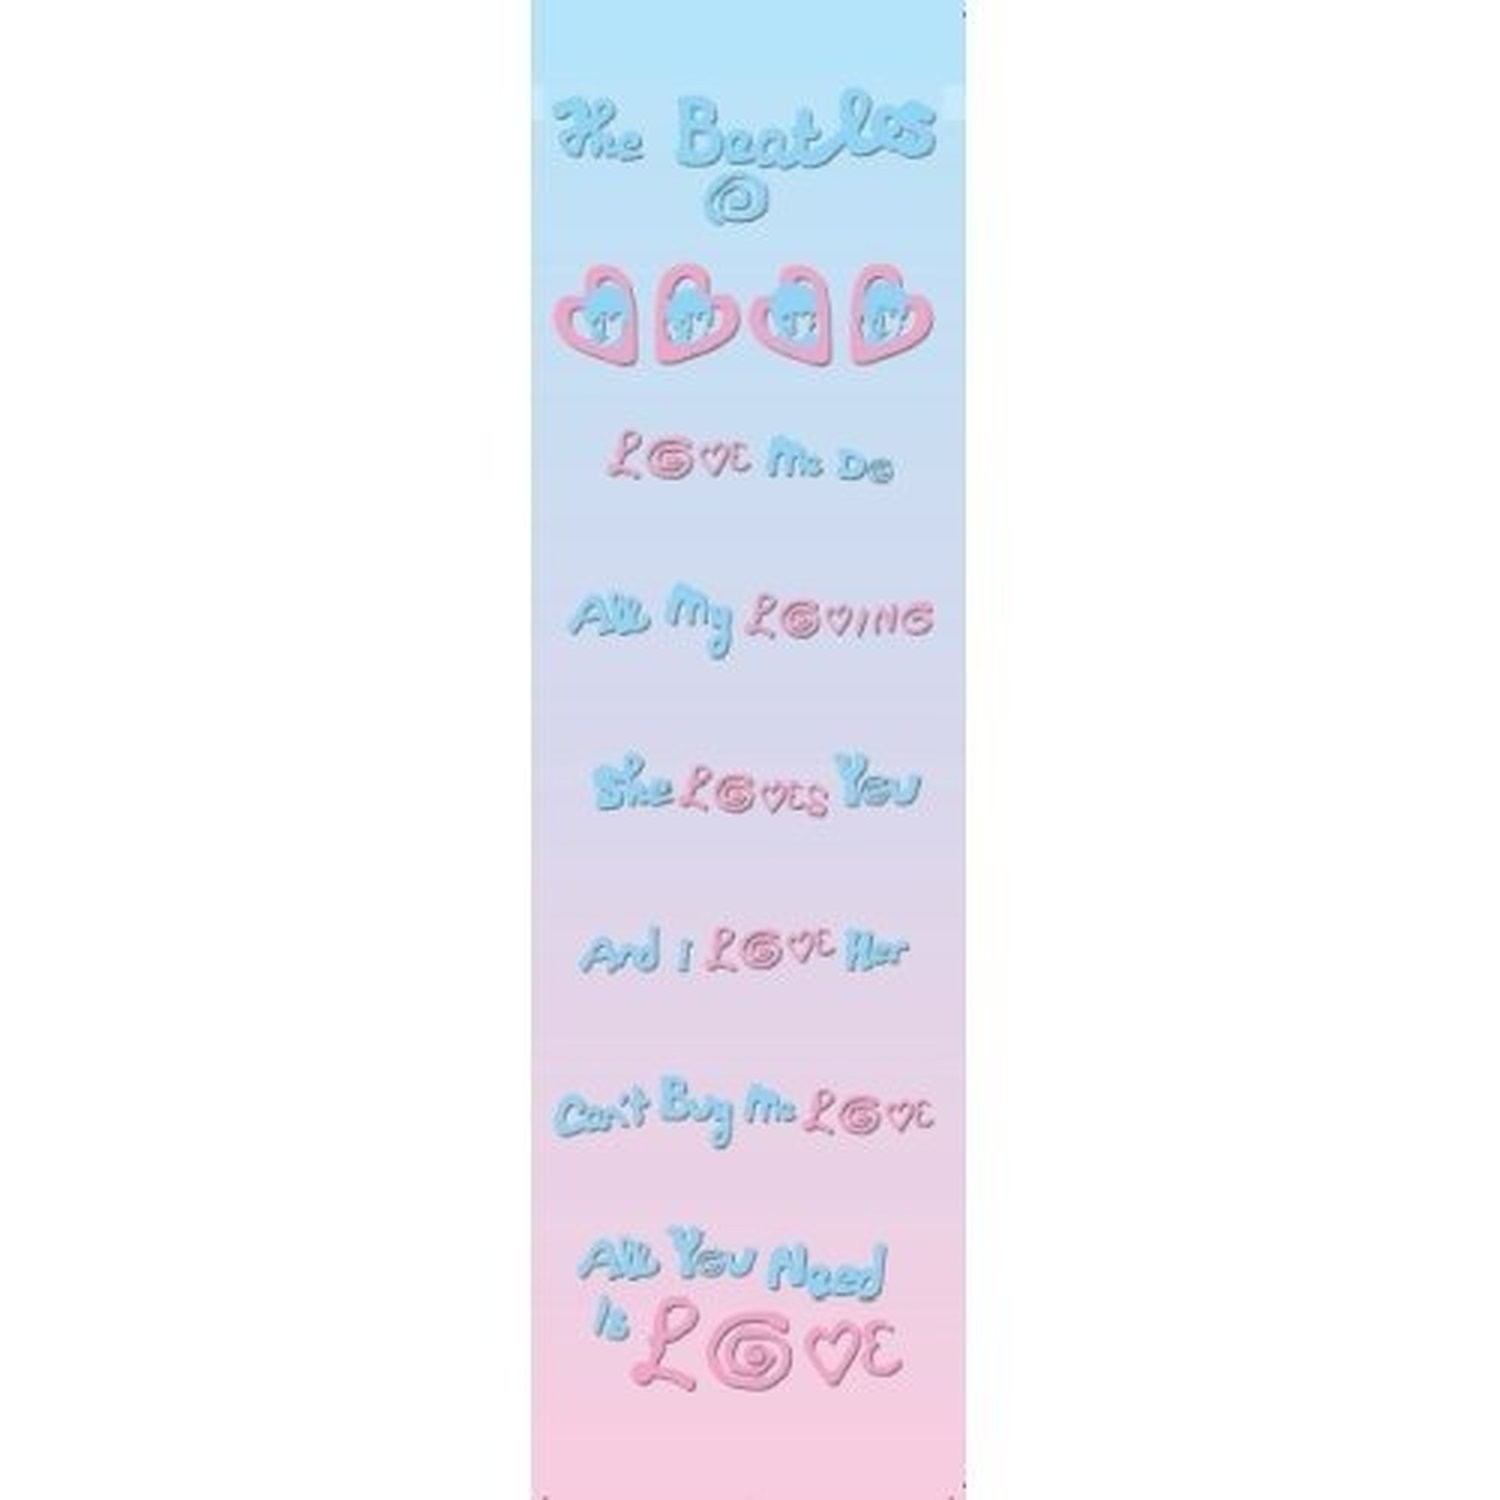 Love Songs By The Beatles Card Bookmark Pink Blue Hearts Gift Fan 100% Official